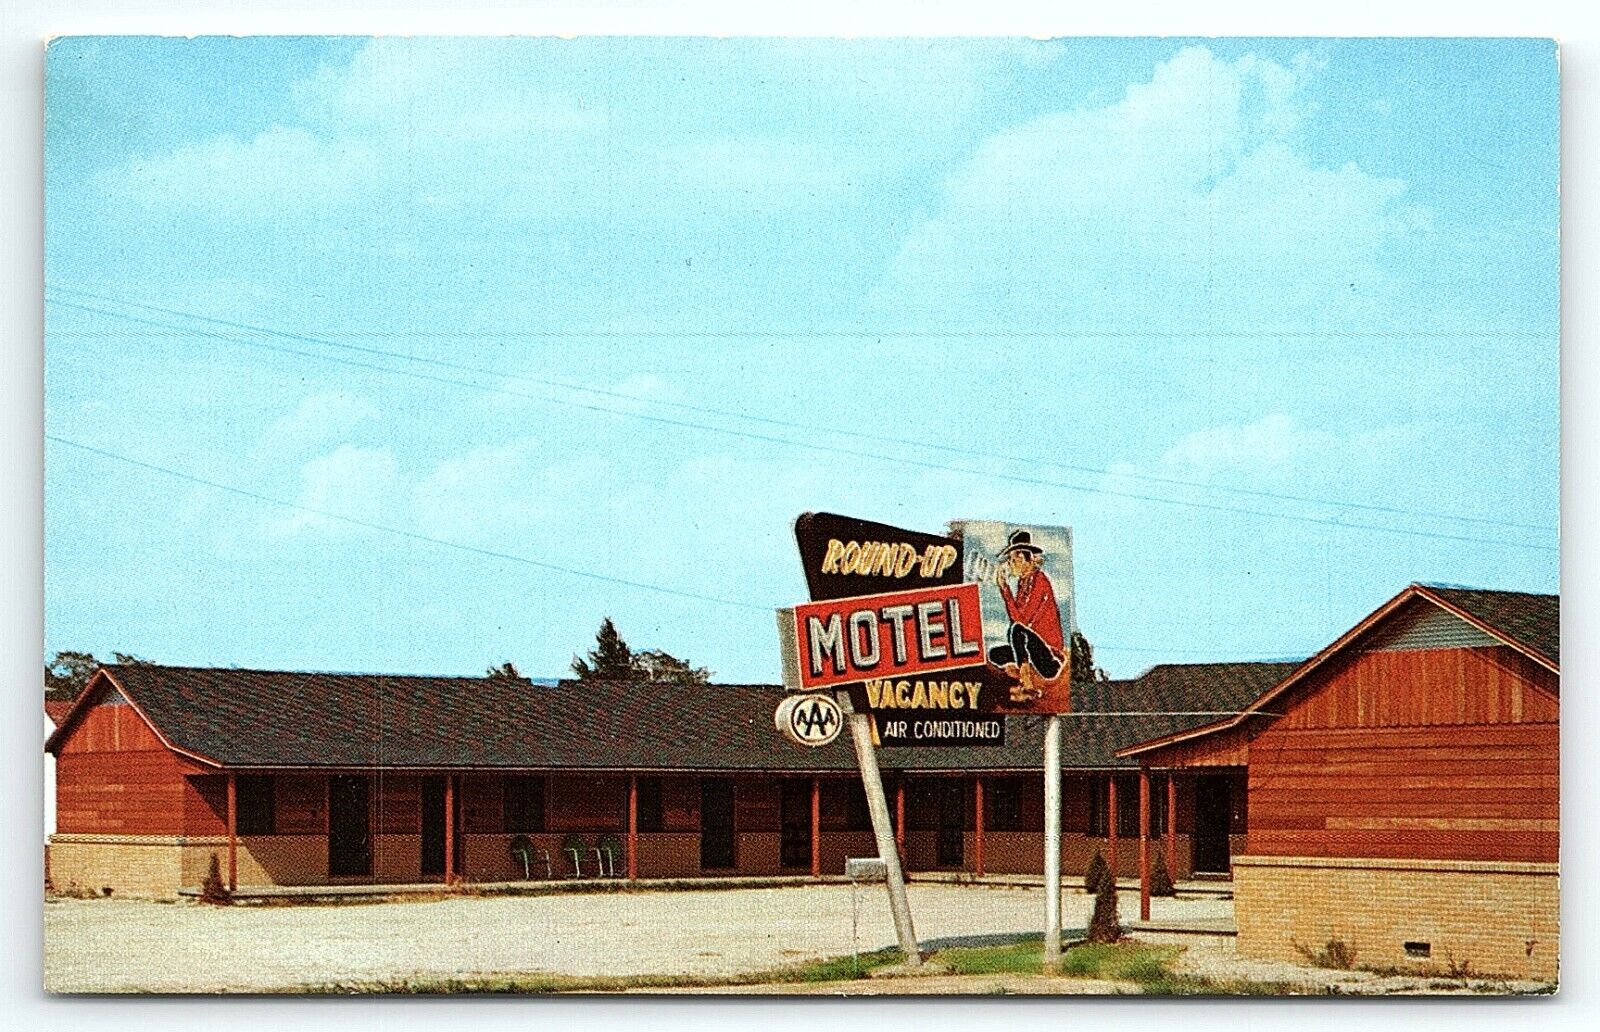 1950s CLAREMORE OK ROUND-UP MOTEL ROUTE 66 COWBOY NEON SIGN POSTCARD P2932